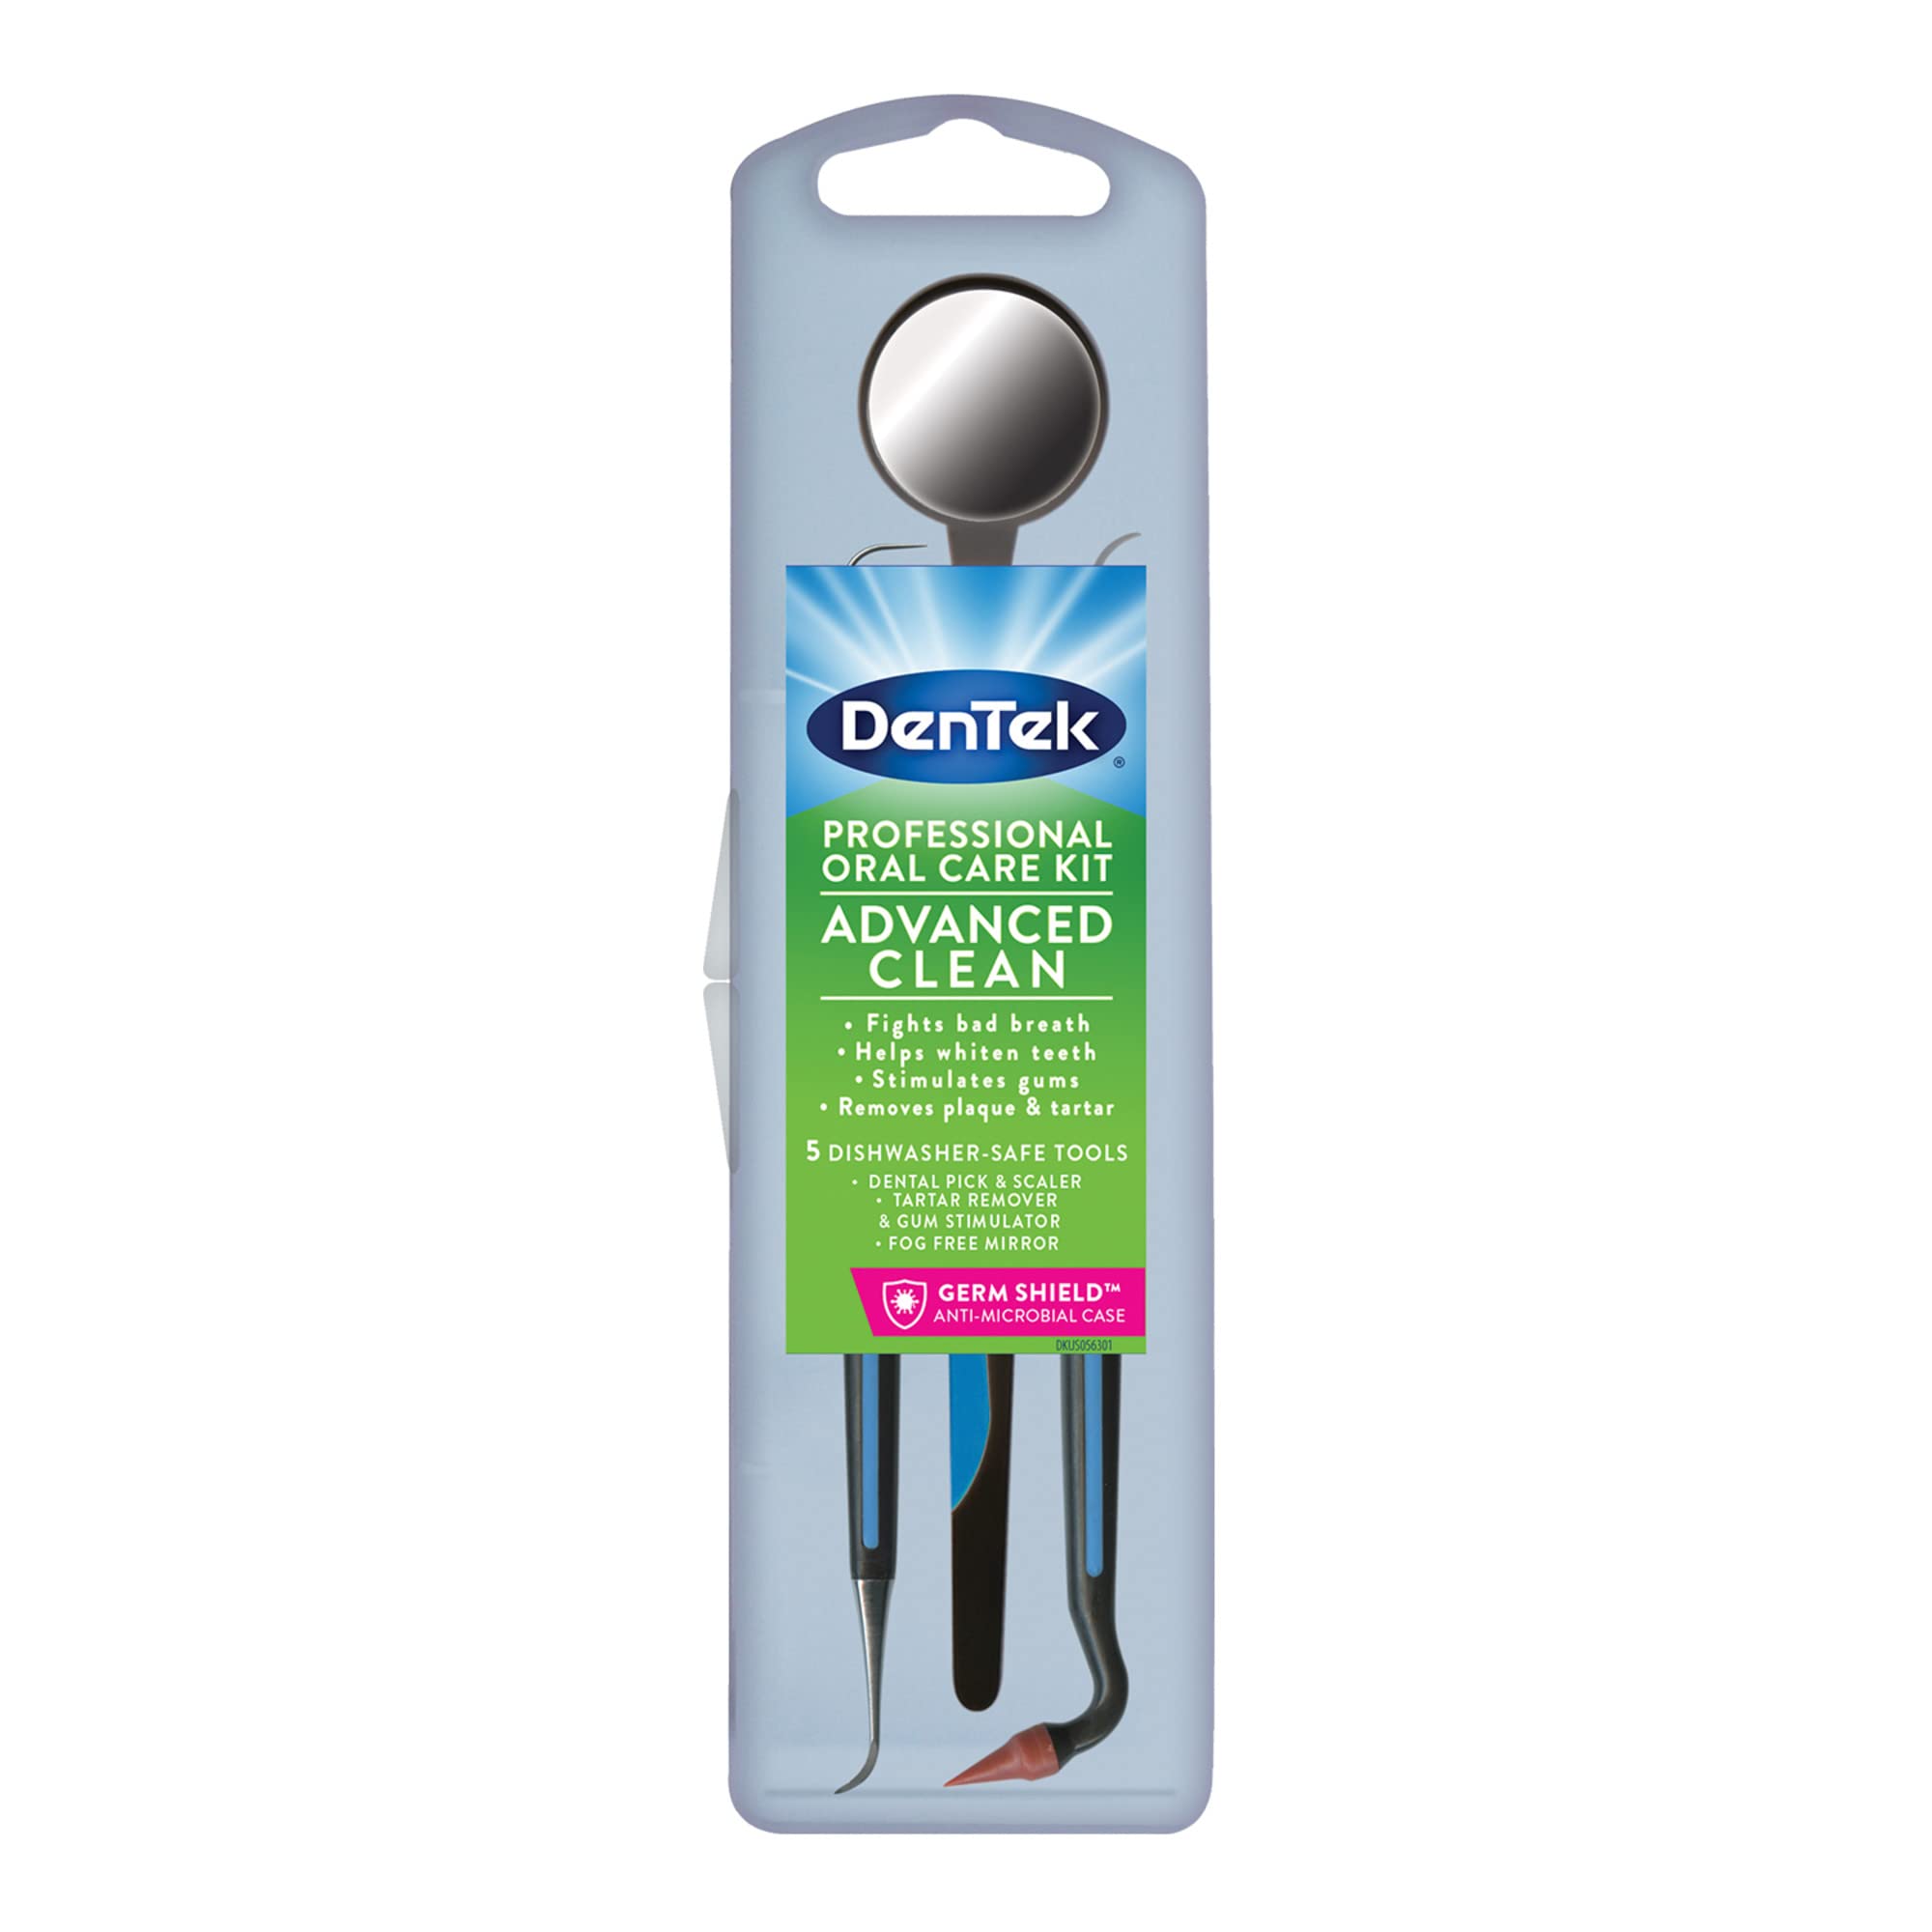 DenTek Professional Oral Care Kit $3.85 w/ S&S + Free Shipping w/ Prime or on $35+